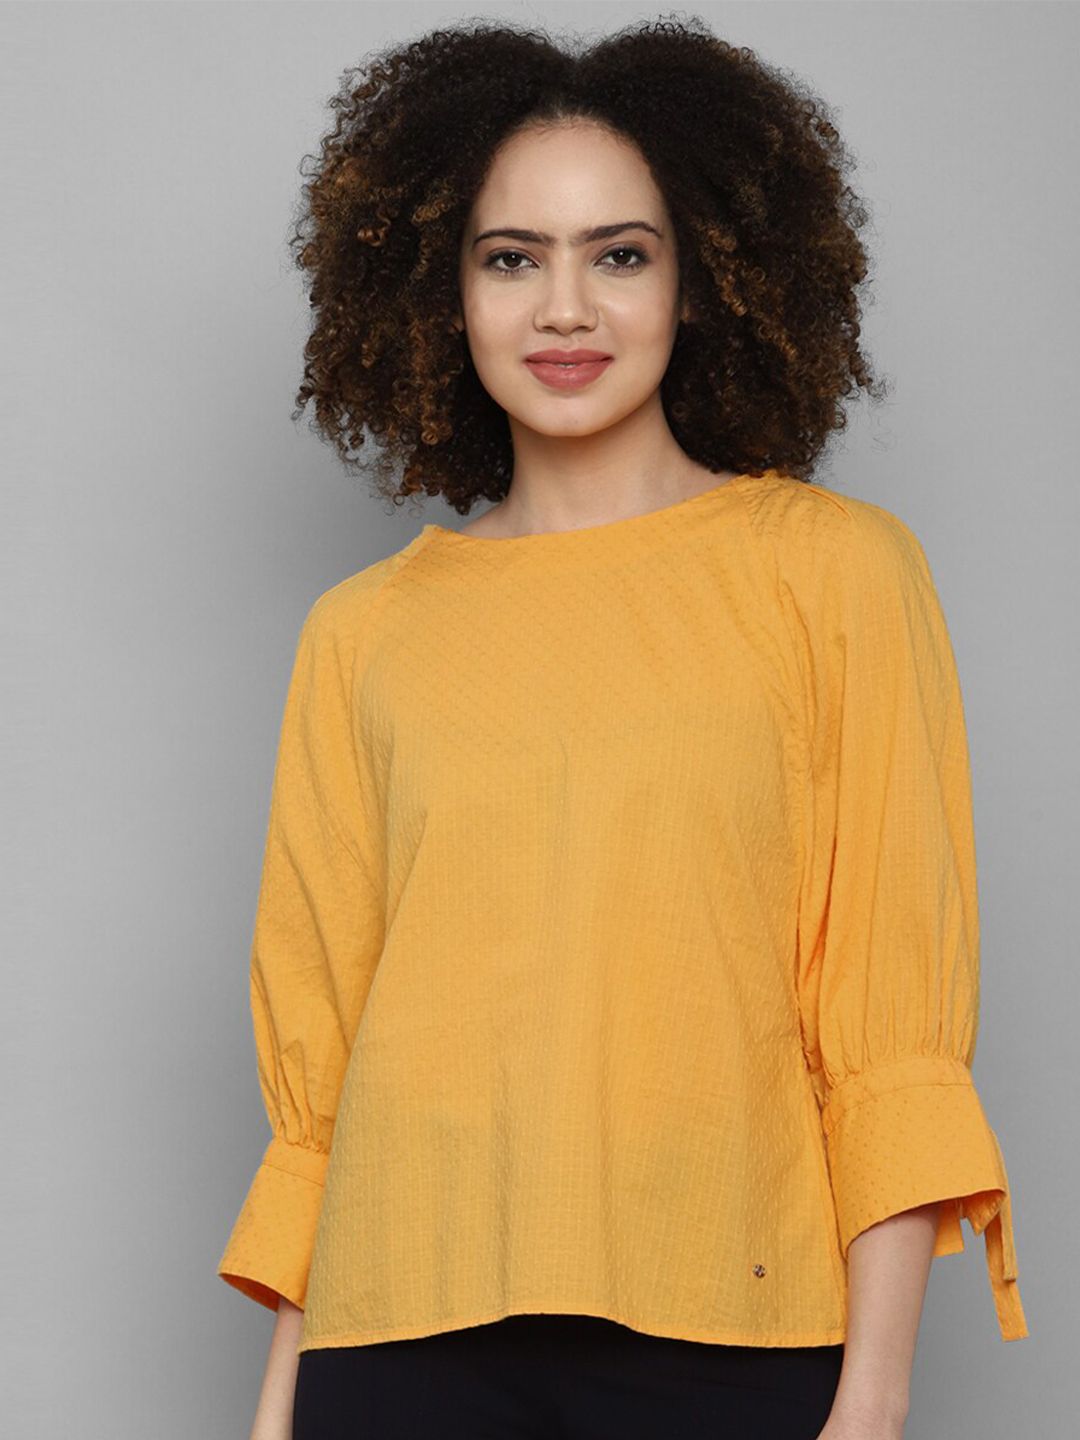 Allen Solly Woman Yellow Solid Cotton Top Price in India